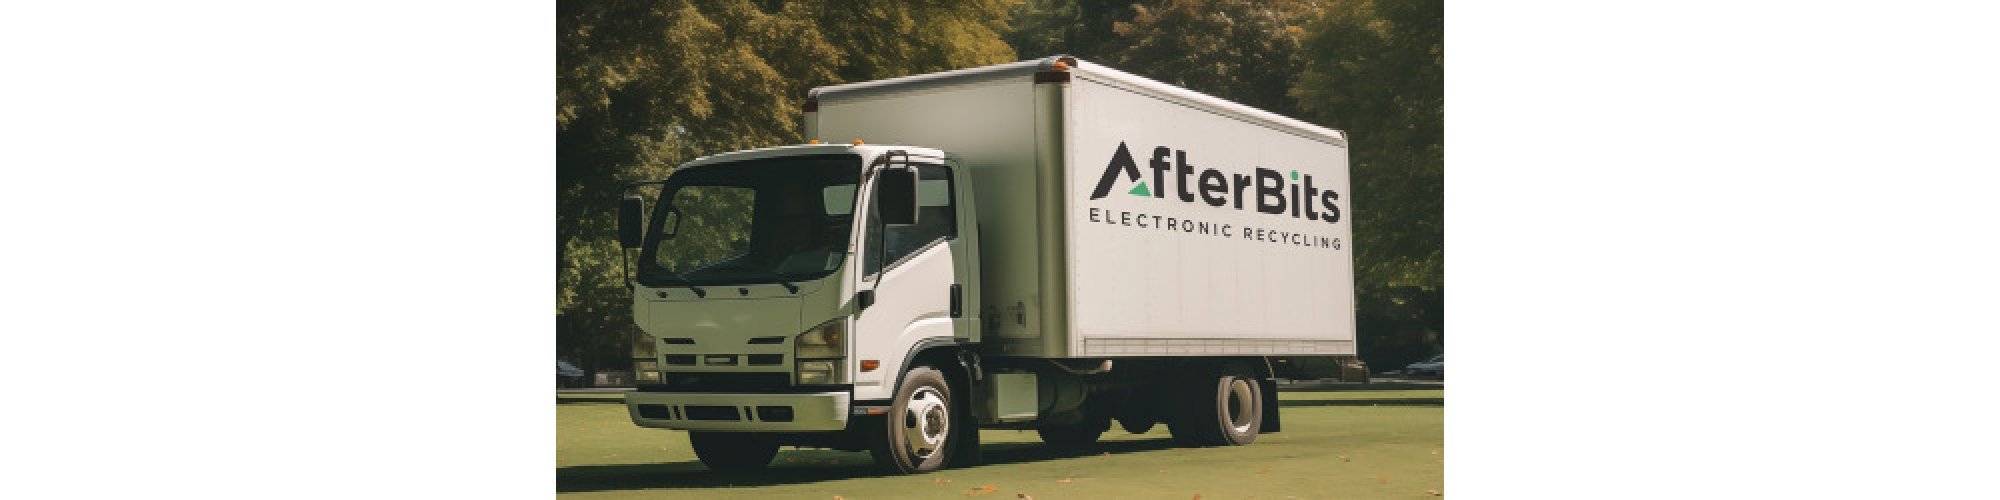 AfterBits Electronic Recycling